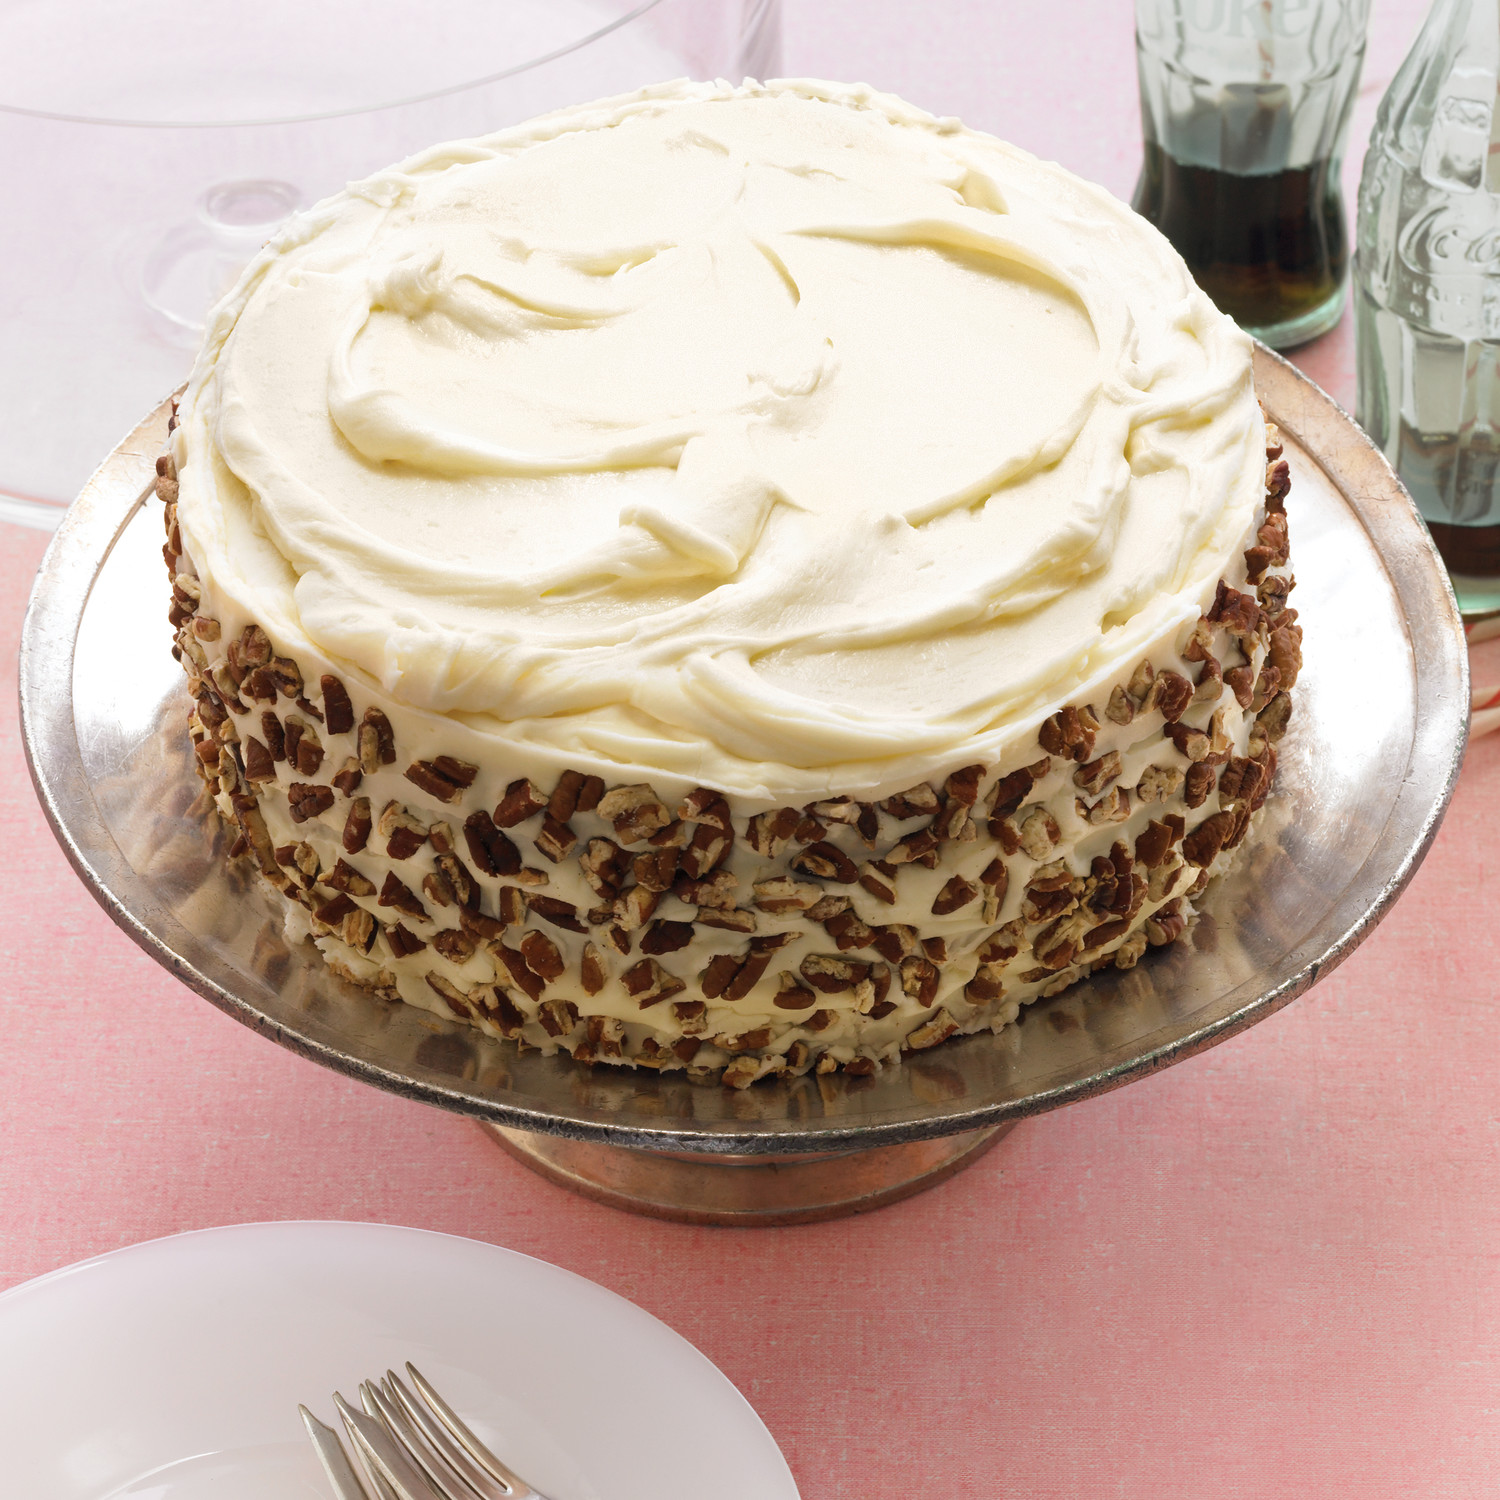 Martha Stewart Carrot Cake With Cream Cheese Frosting